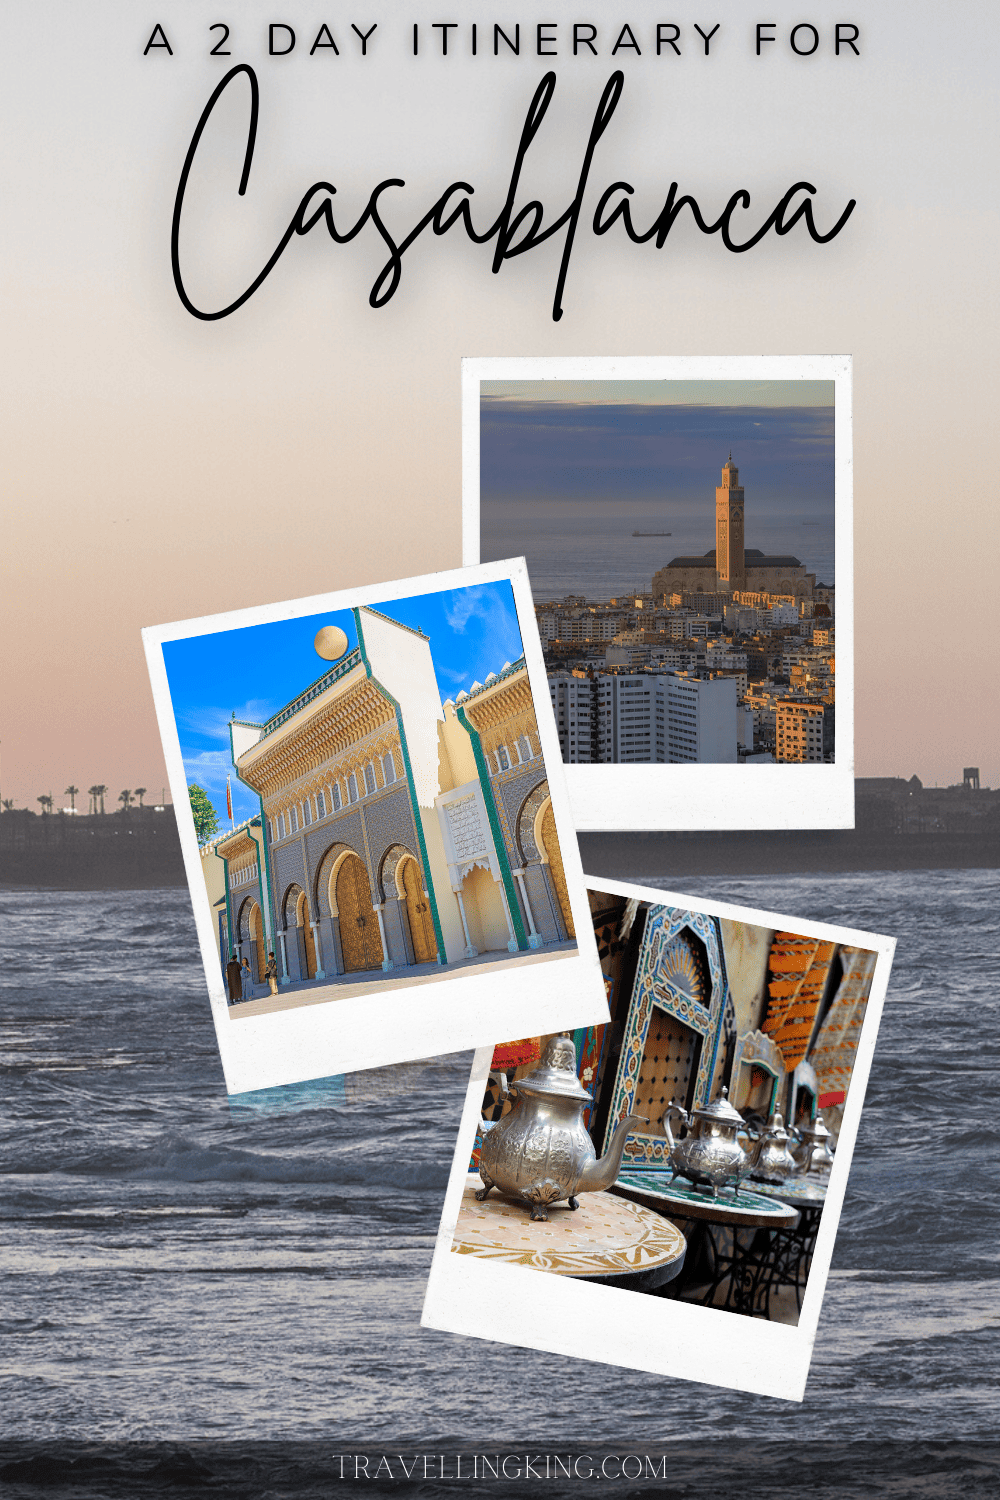 48 hours in Casablanca - A 2 day Itinerary